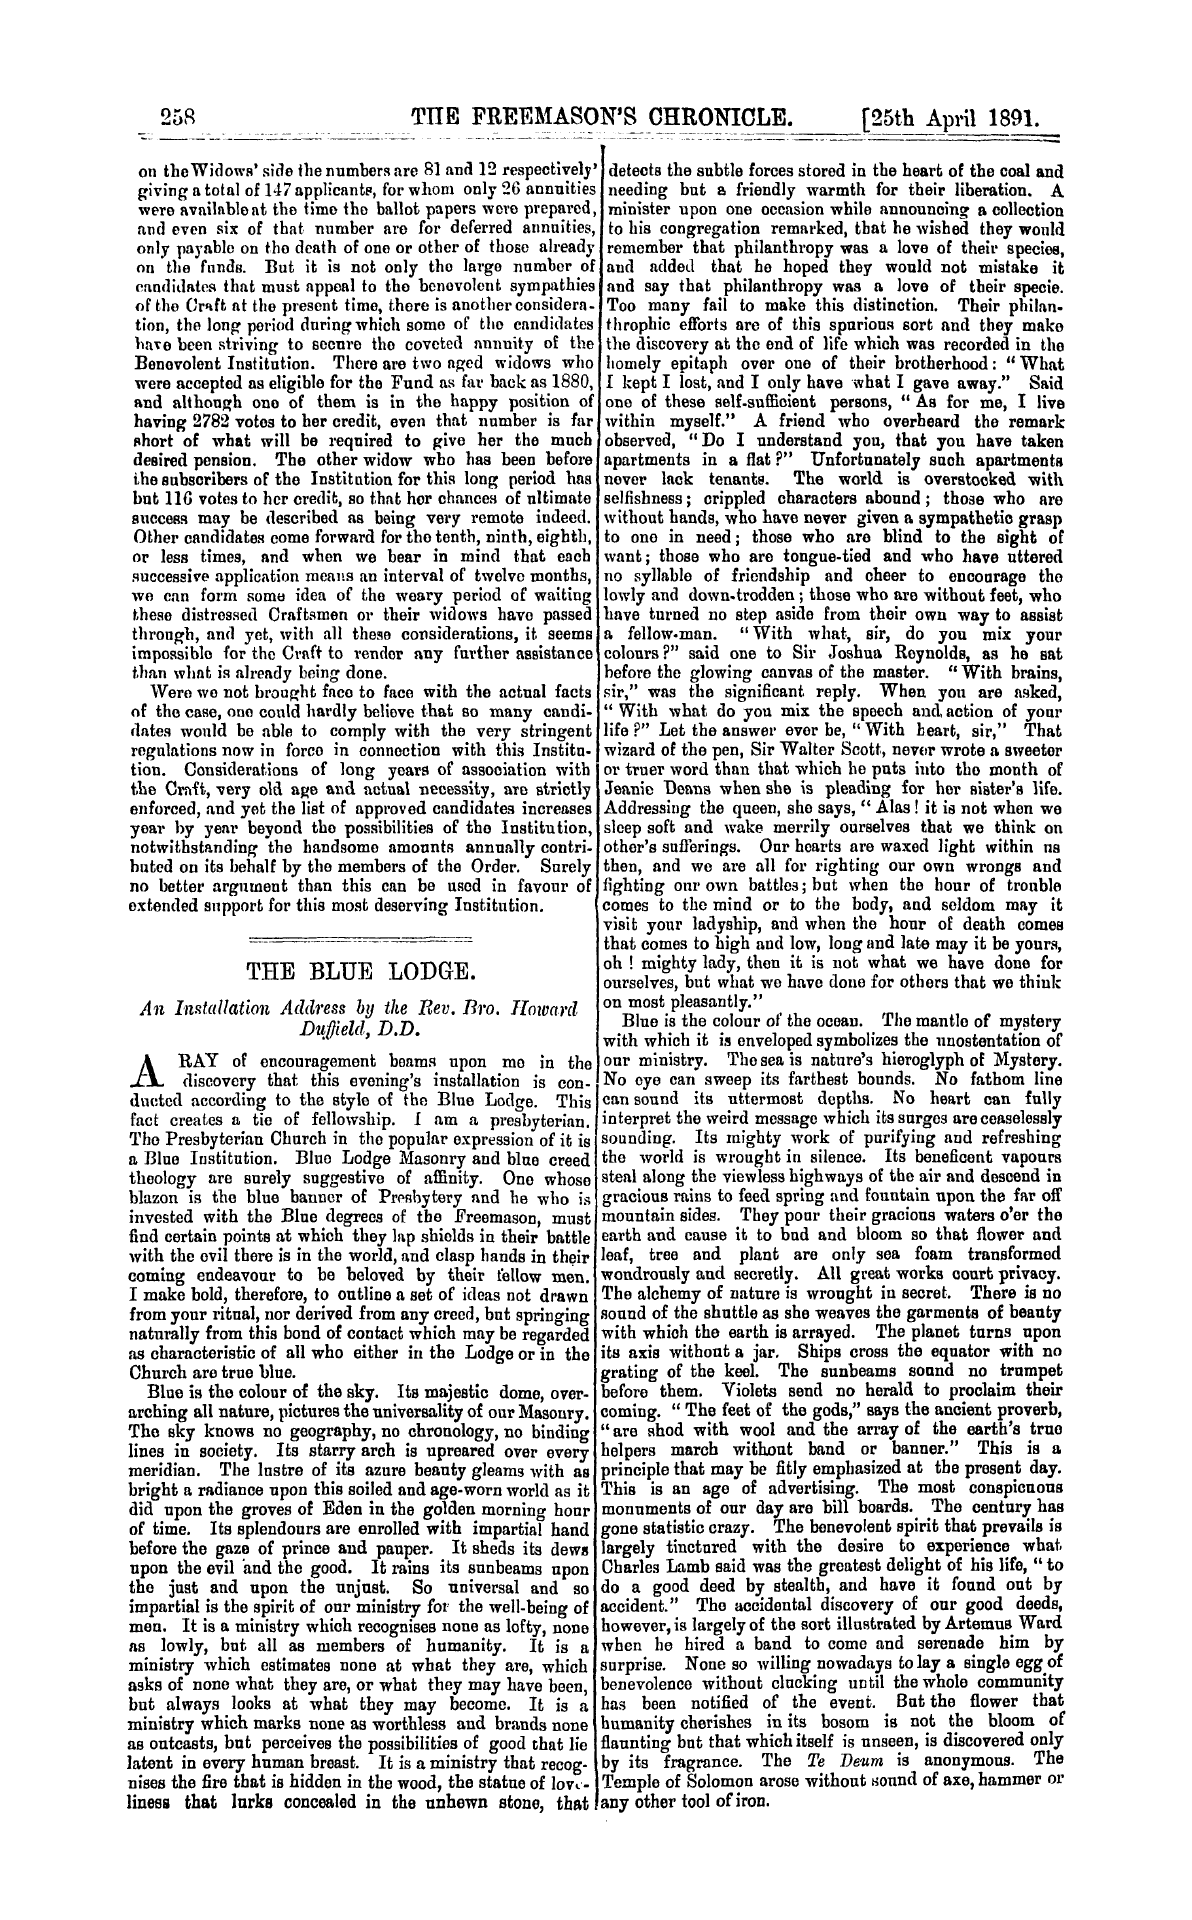 The Freemason's Chronicle: 1891-04-25 - The Benevolent Institution And Its Candidates.